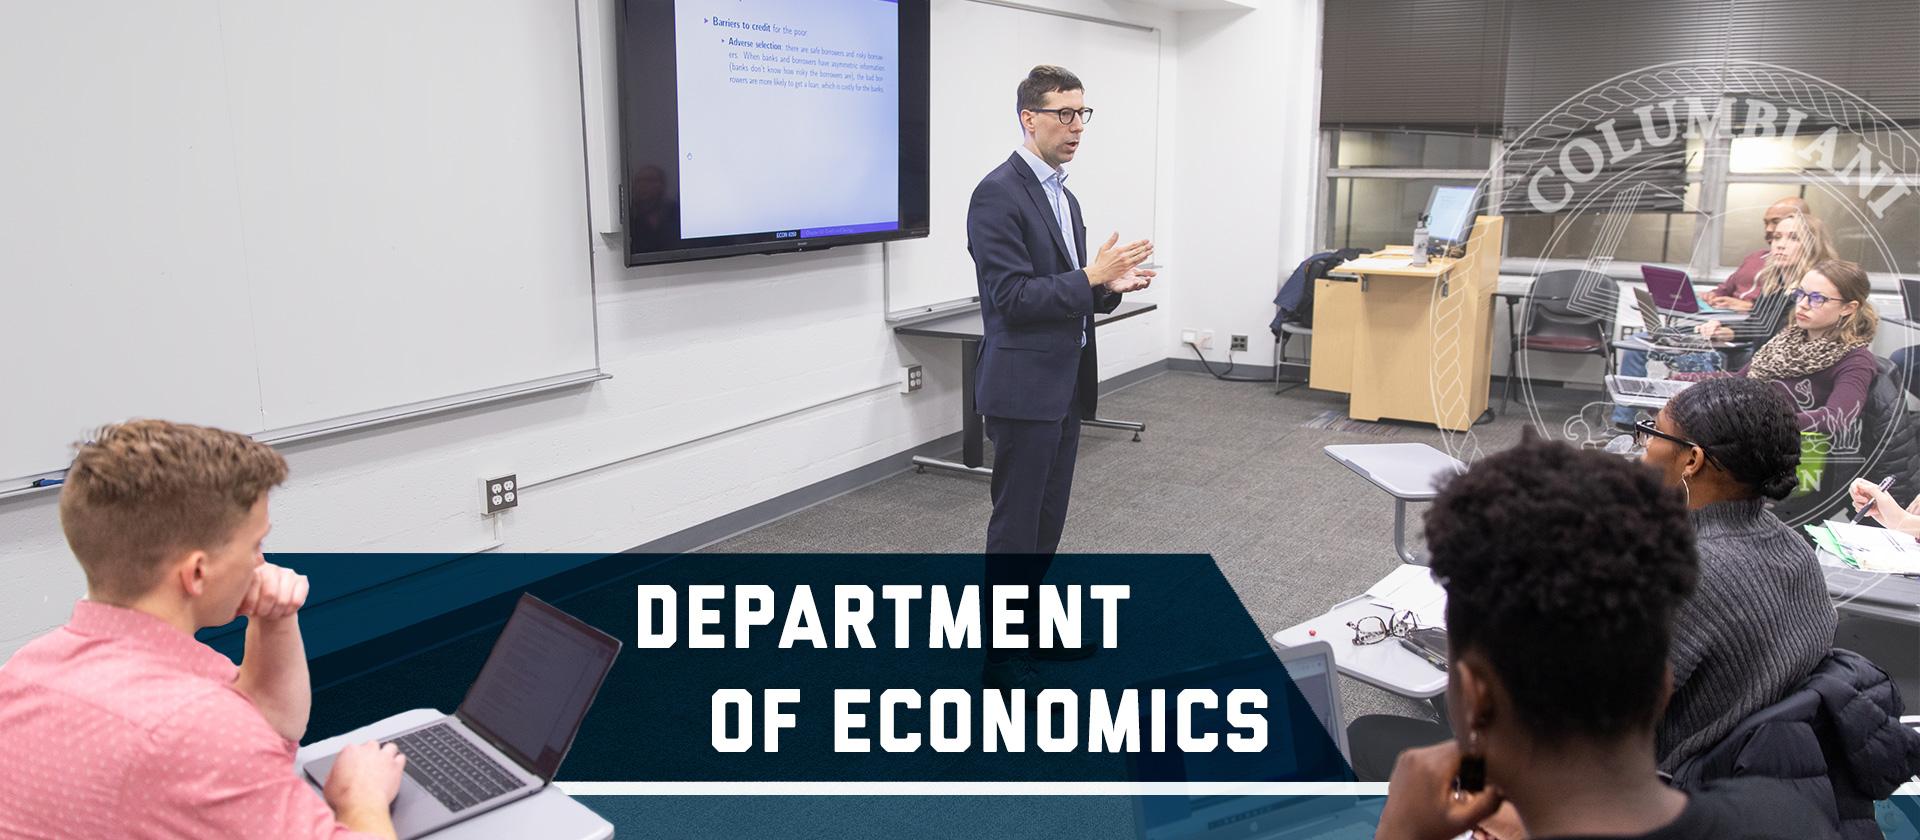 Department of Economics with Columbian College seal. Professor Remi Jedwab teaches a class in front of a whiteboard